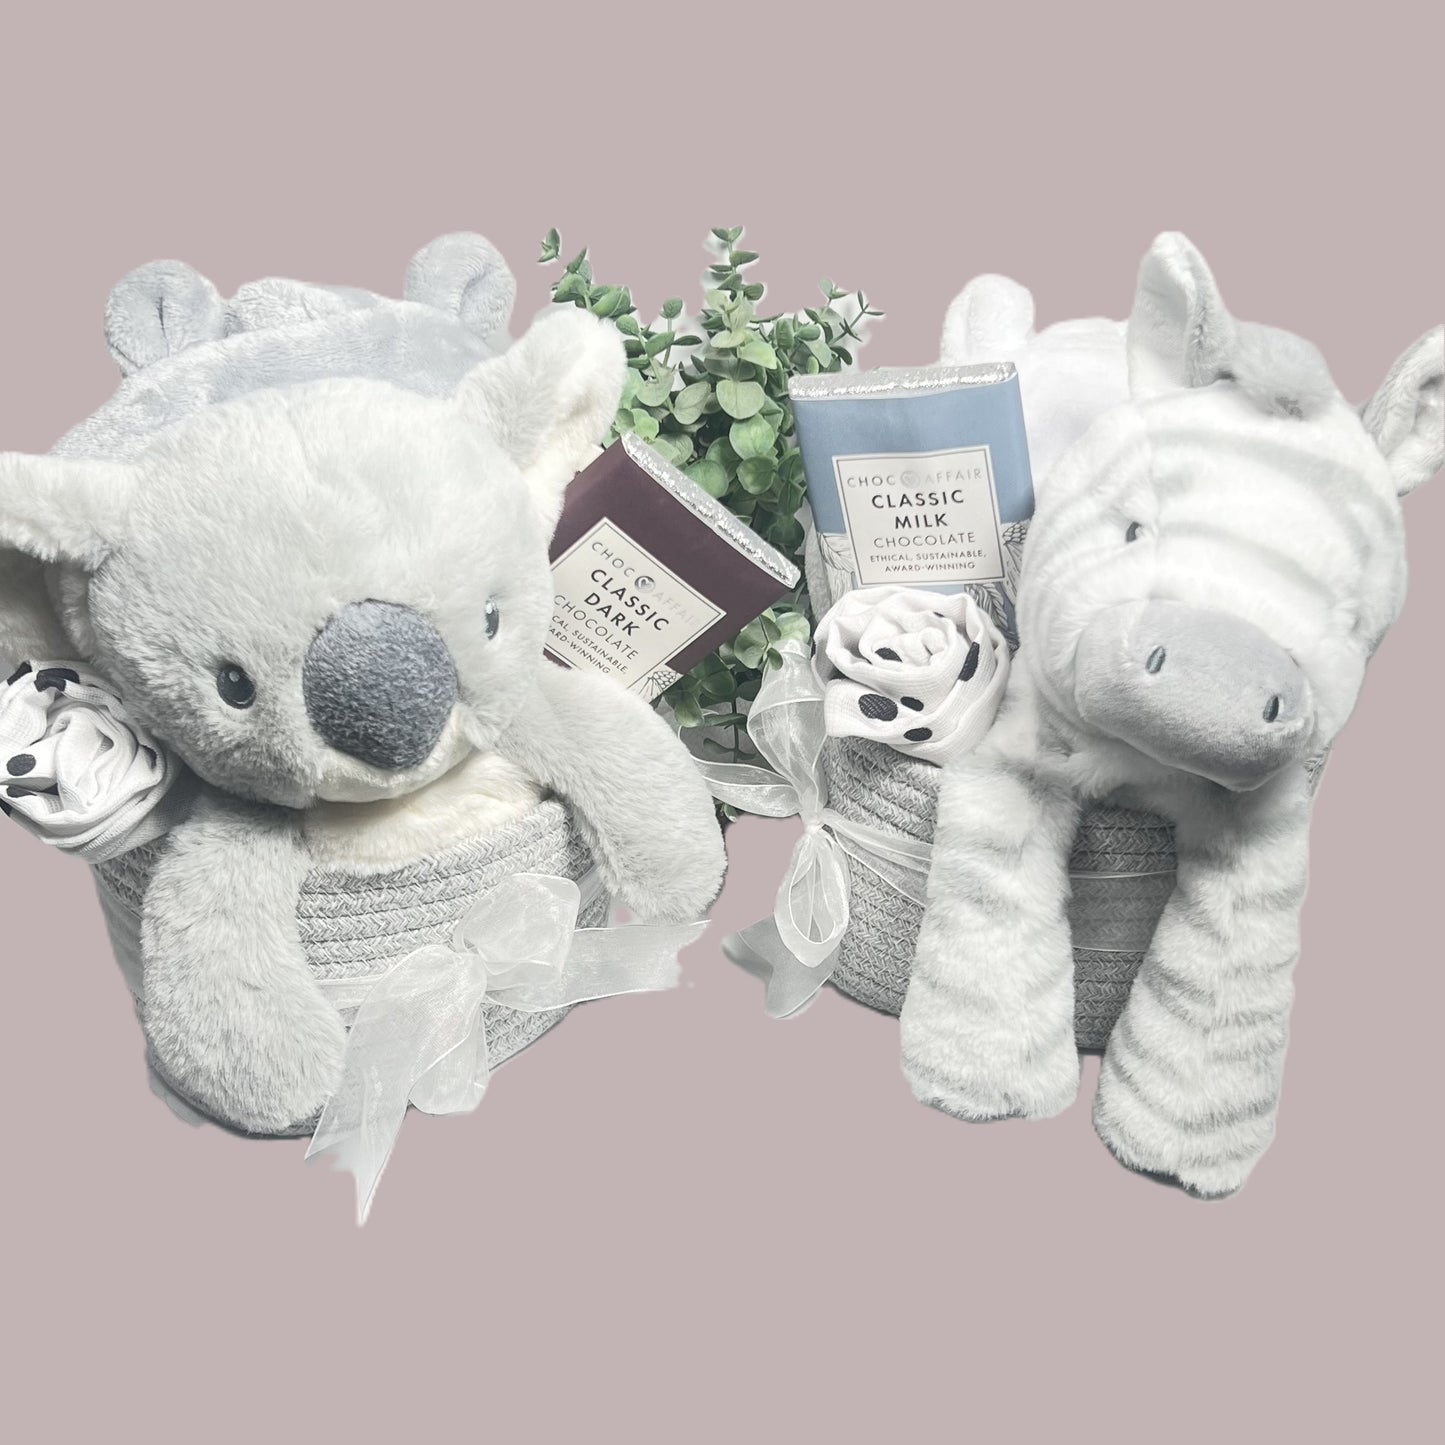 Unisex grey and white new baby hamper gifts in a cotton rope storage caddy in grey tied with a white organza ribbon, a grey and white koala bear or Zebra baby soft toy a bar of chocolate , a grey or white dressing gown and a black and white baby muslin.